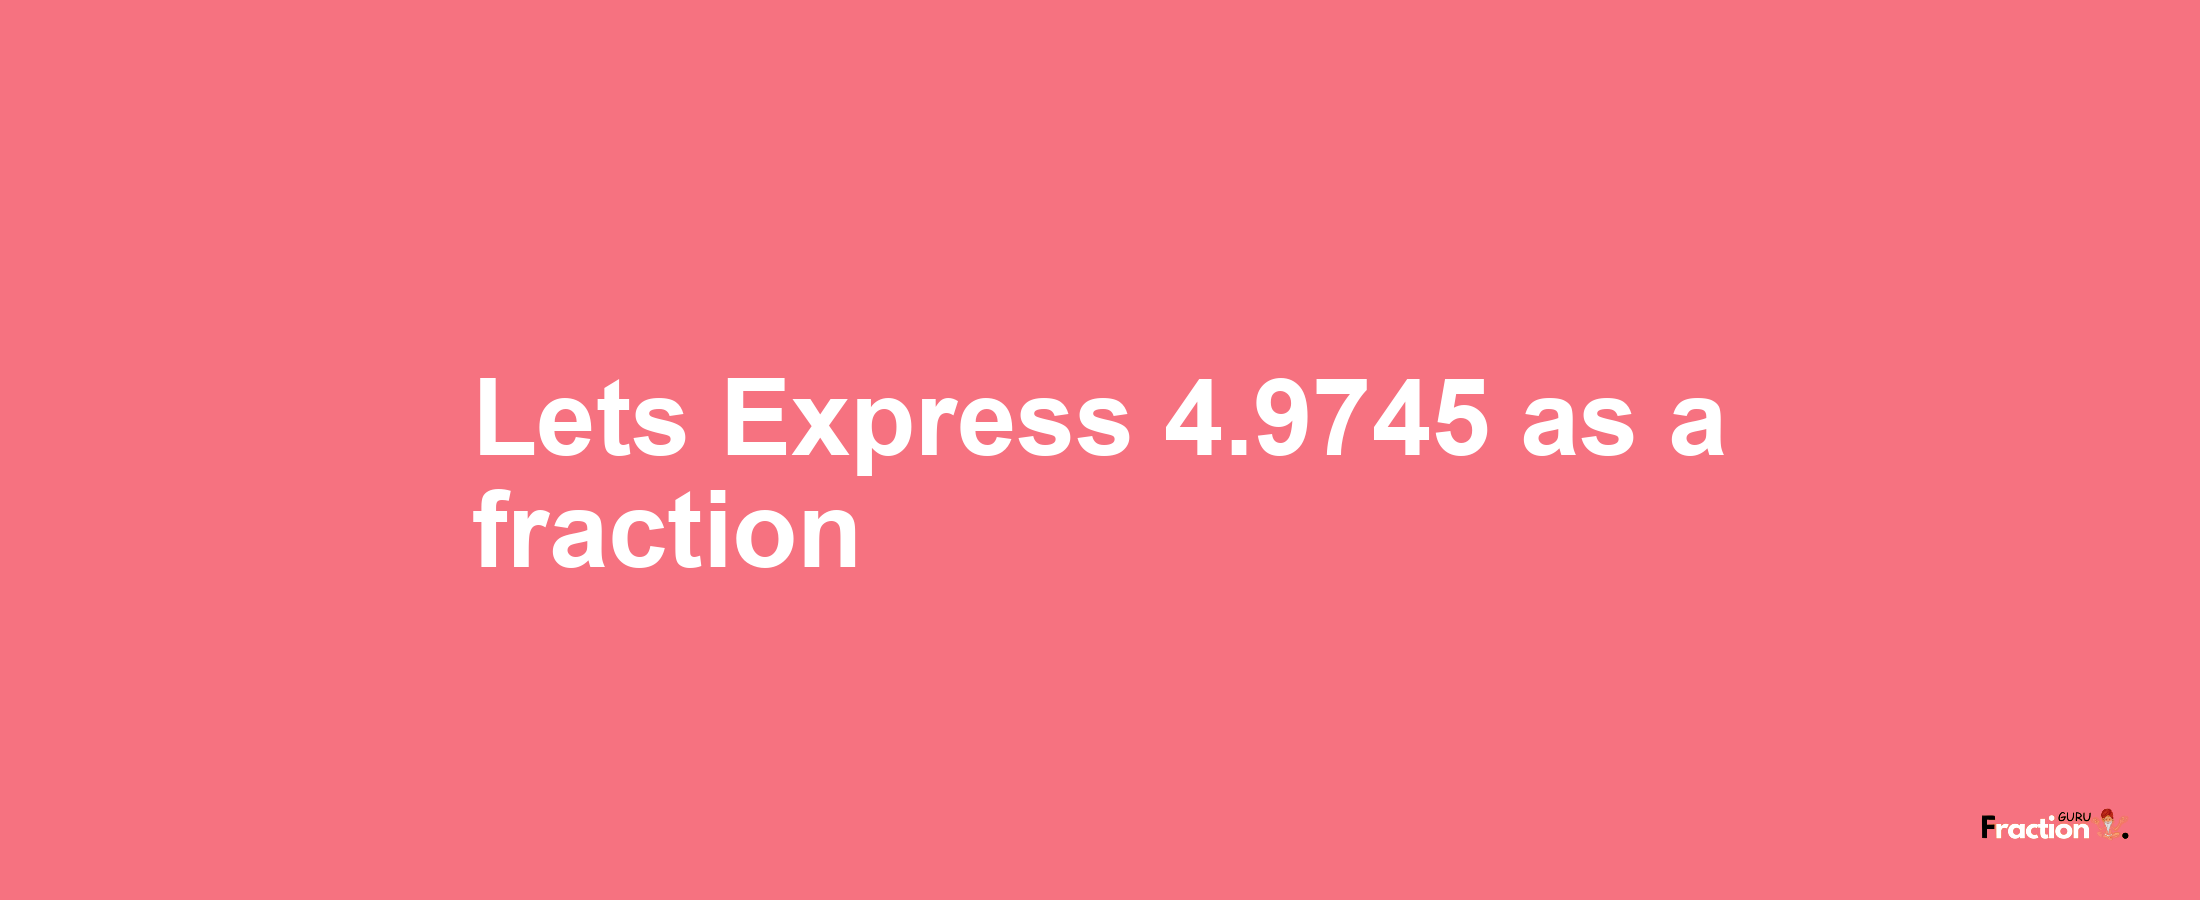 Lets Express 4.9745 as afraction